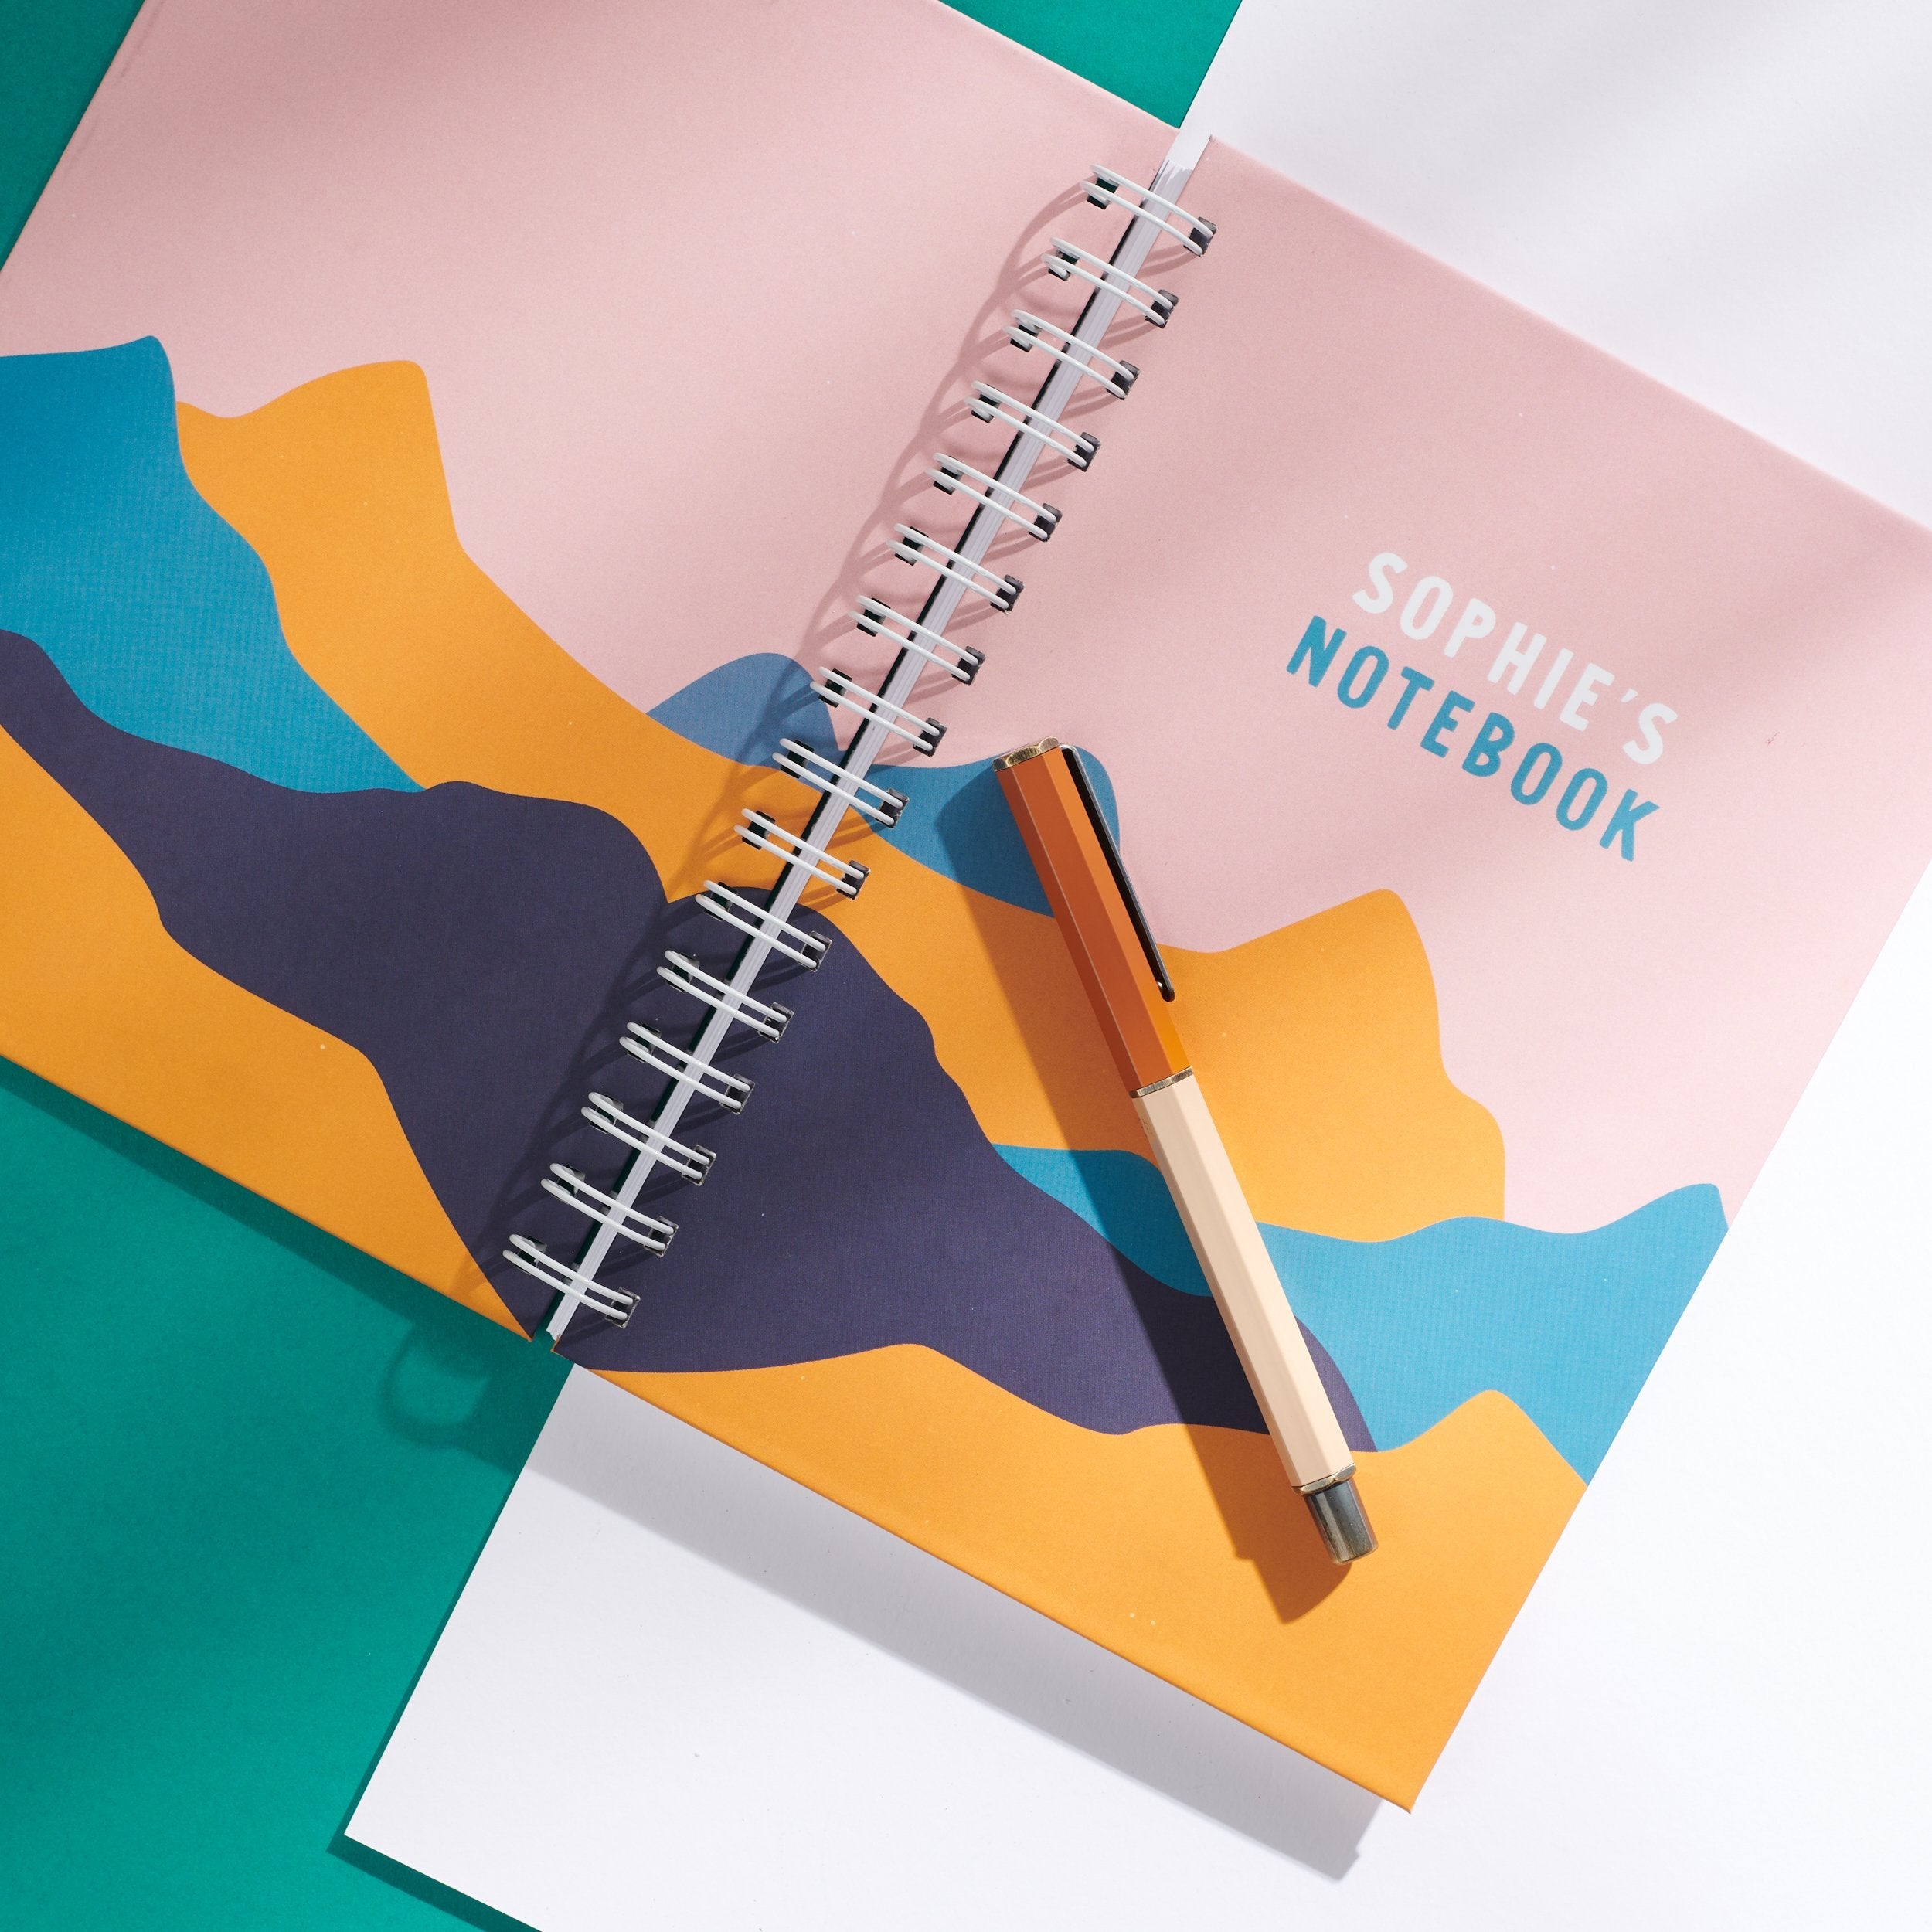 Oakdene Designs Notebooks Personalised Abstract Landscape Notebook